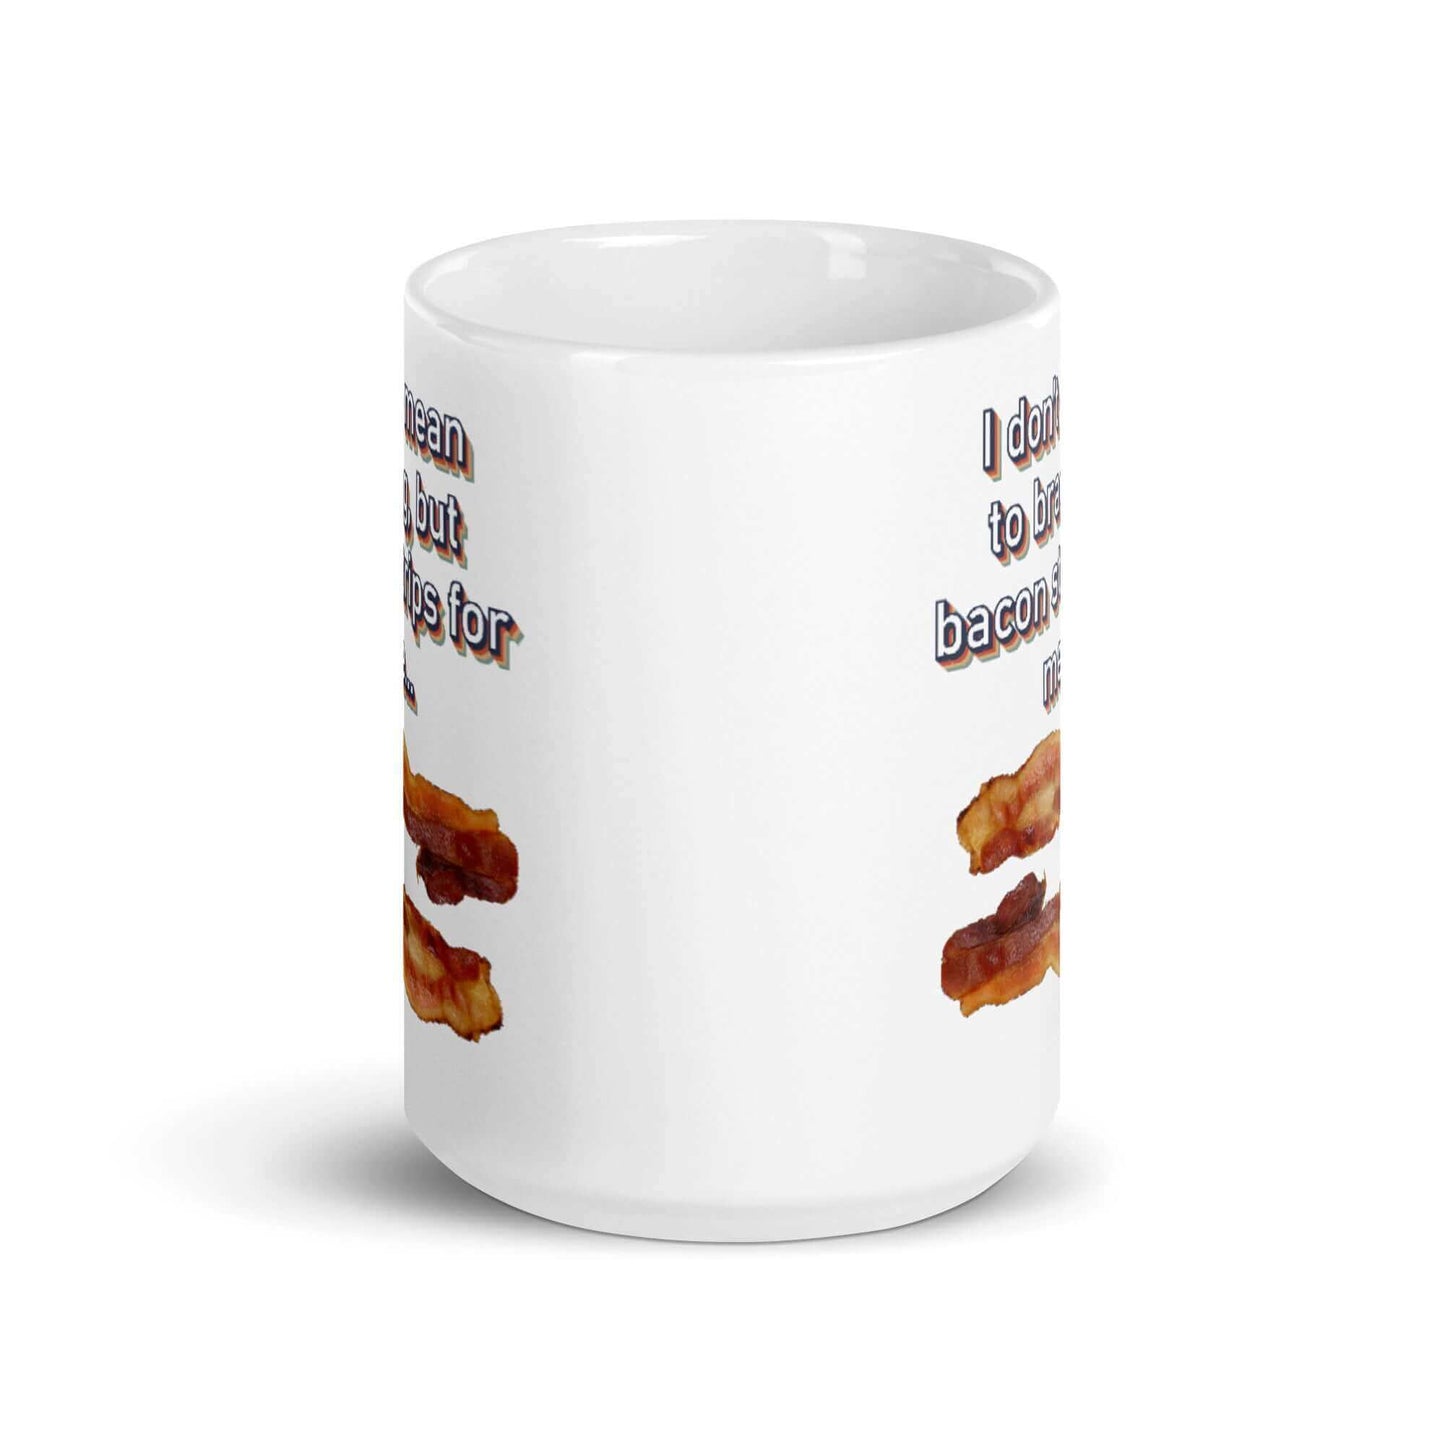 I don't mean to brag, but bacon strips for me - White glossy mug - Horrible Designs